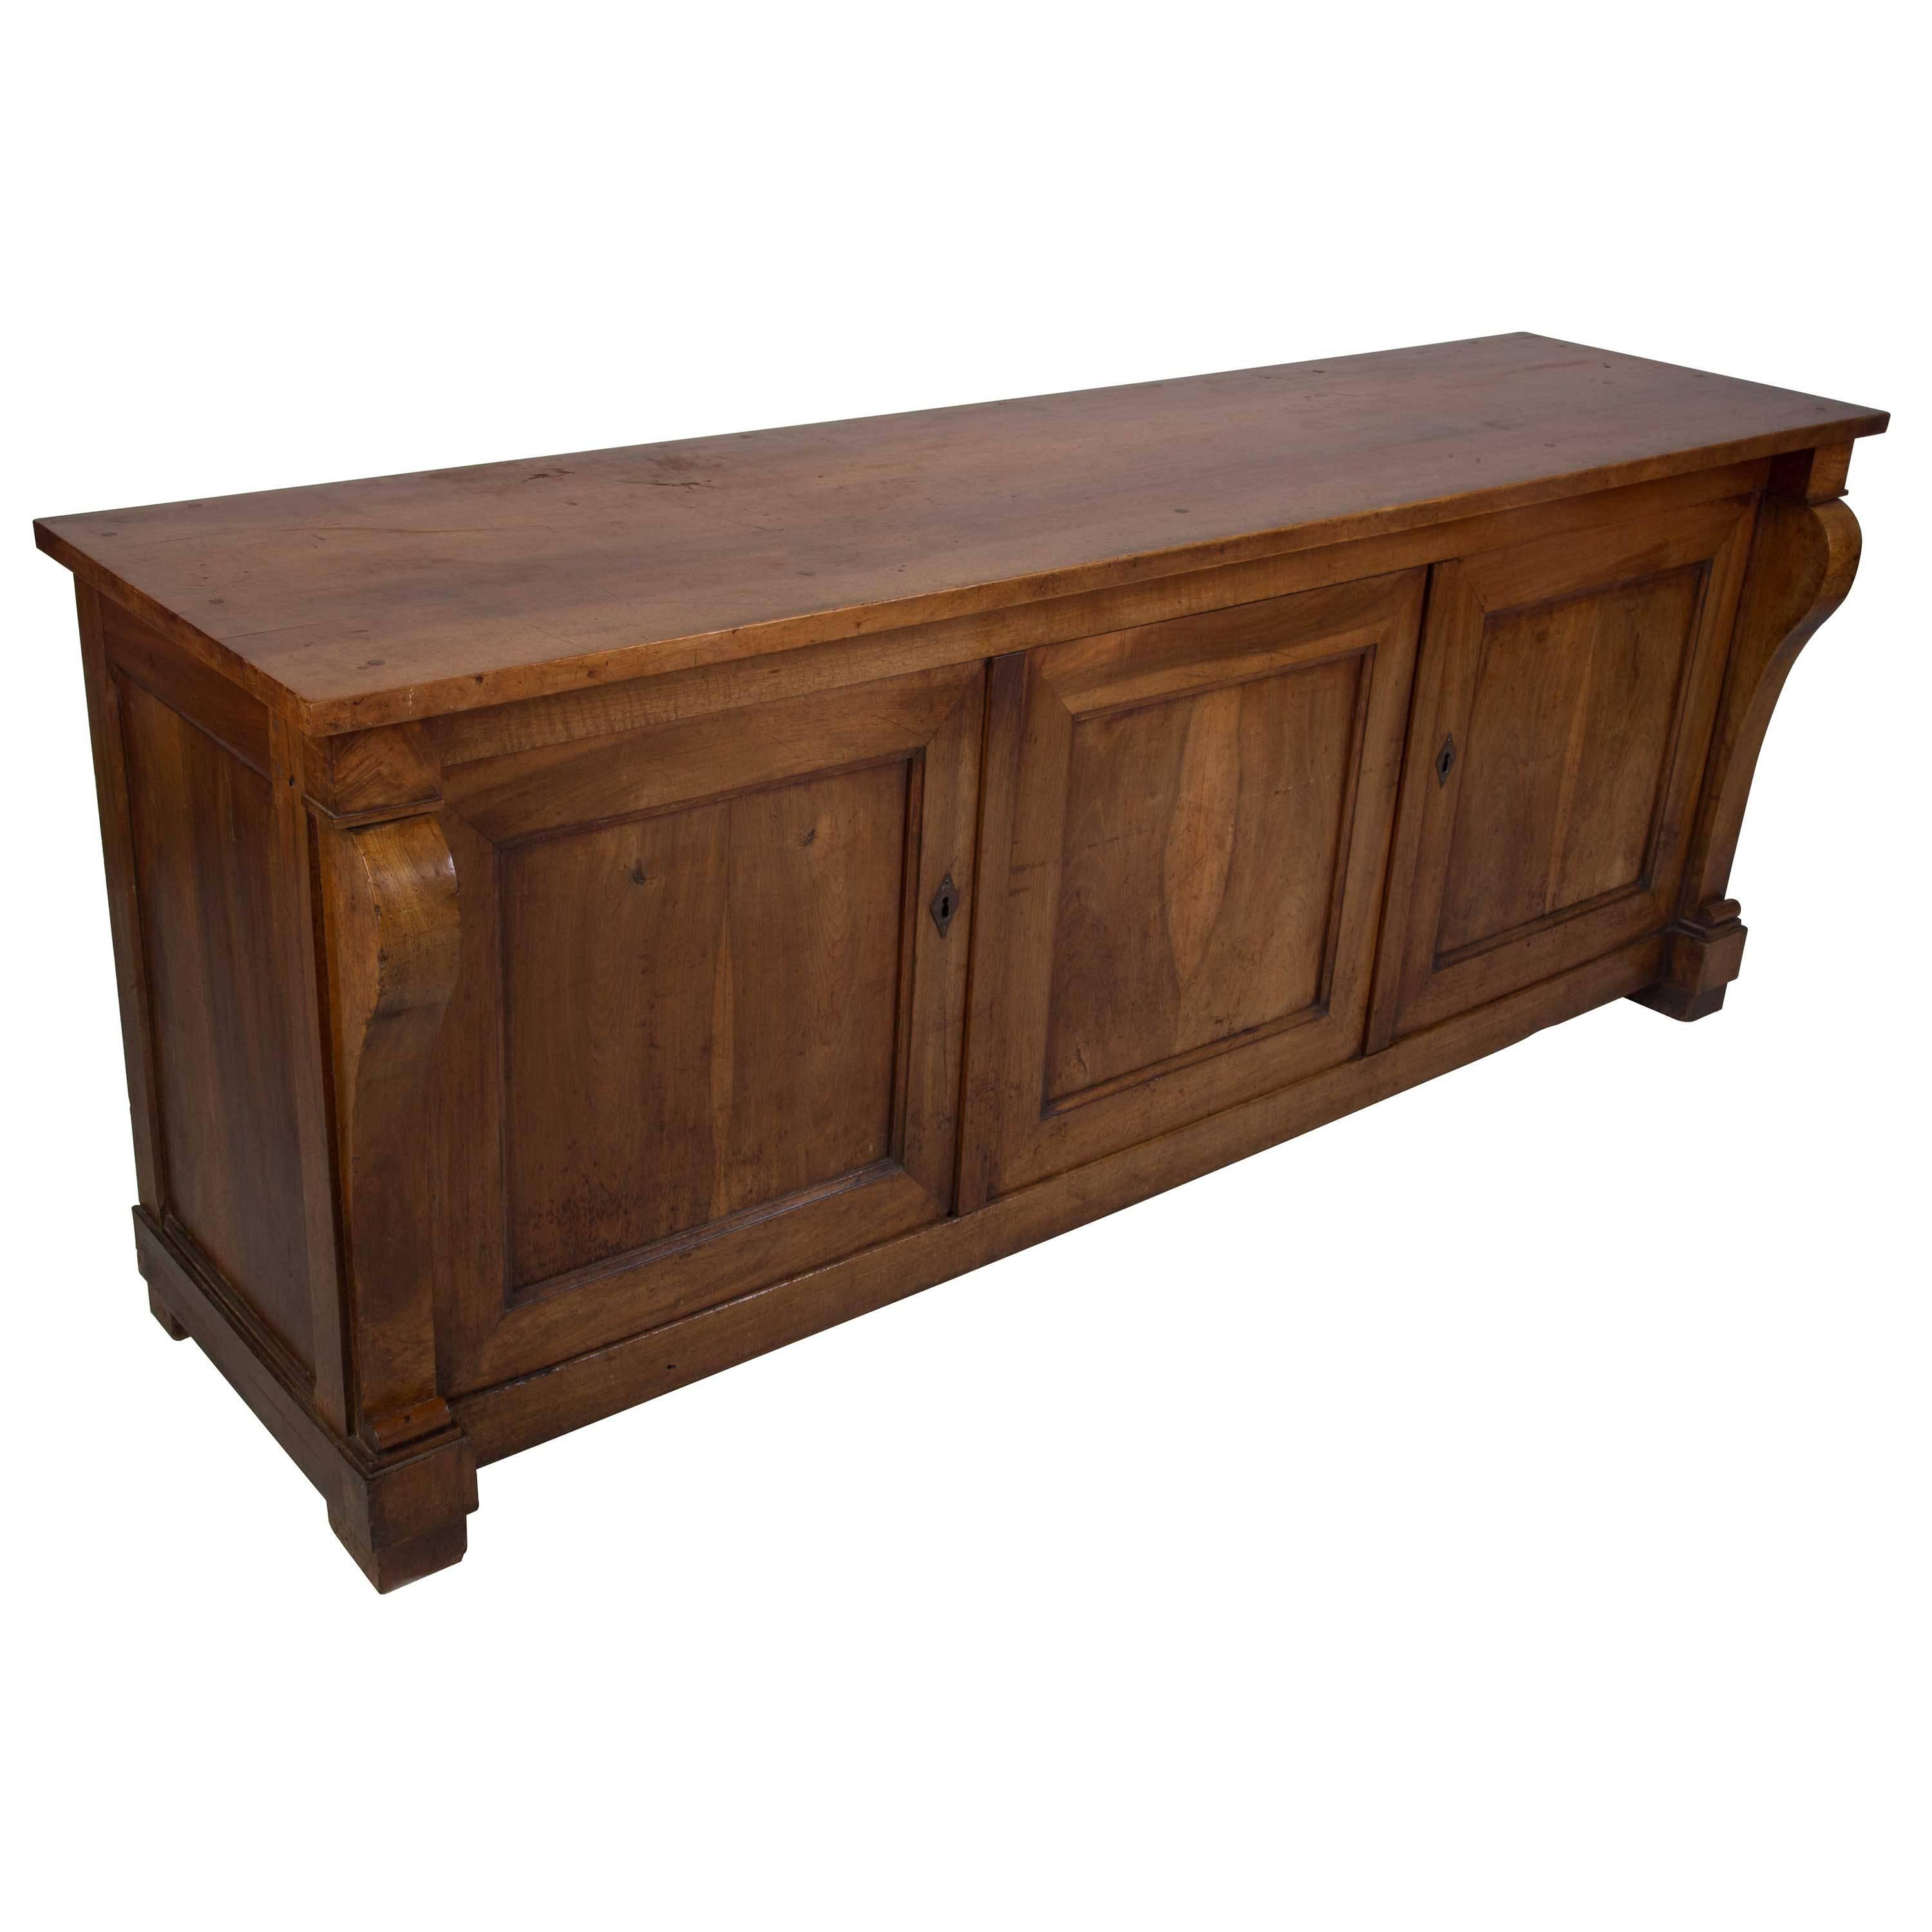 An early 19th century French walnut enfilade of wonderful shape and style, circa 1810.